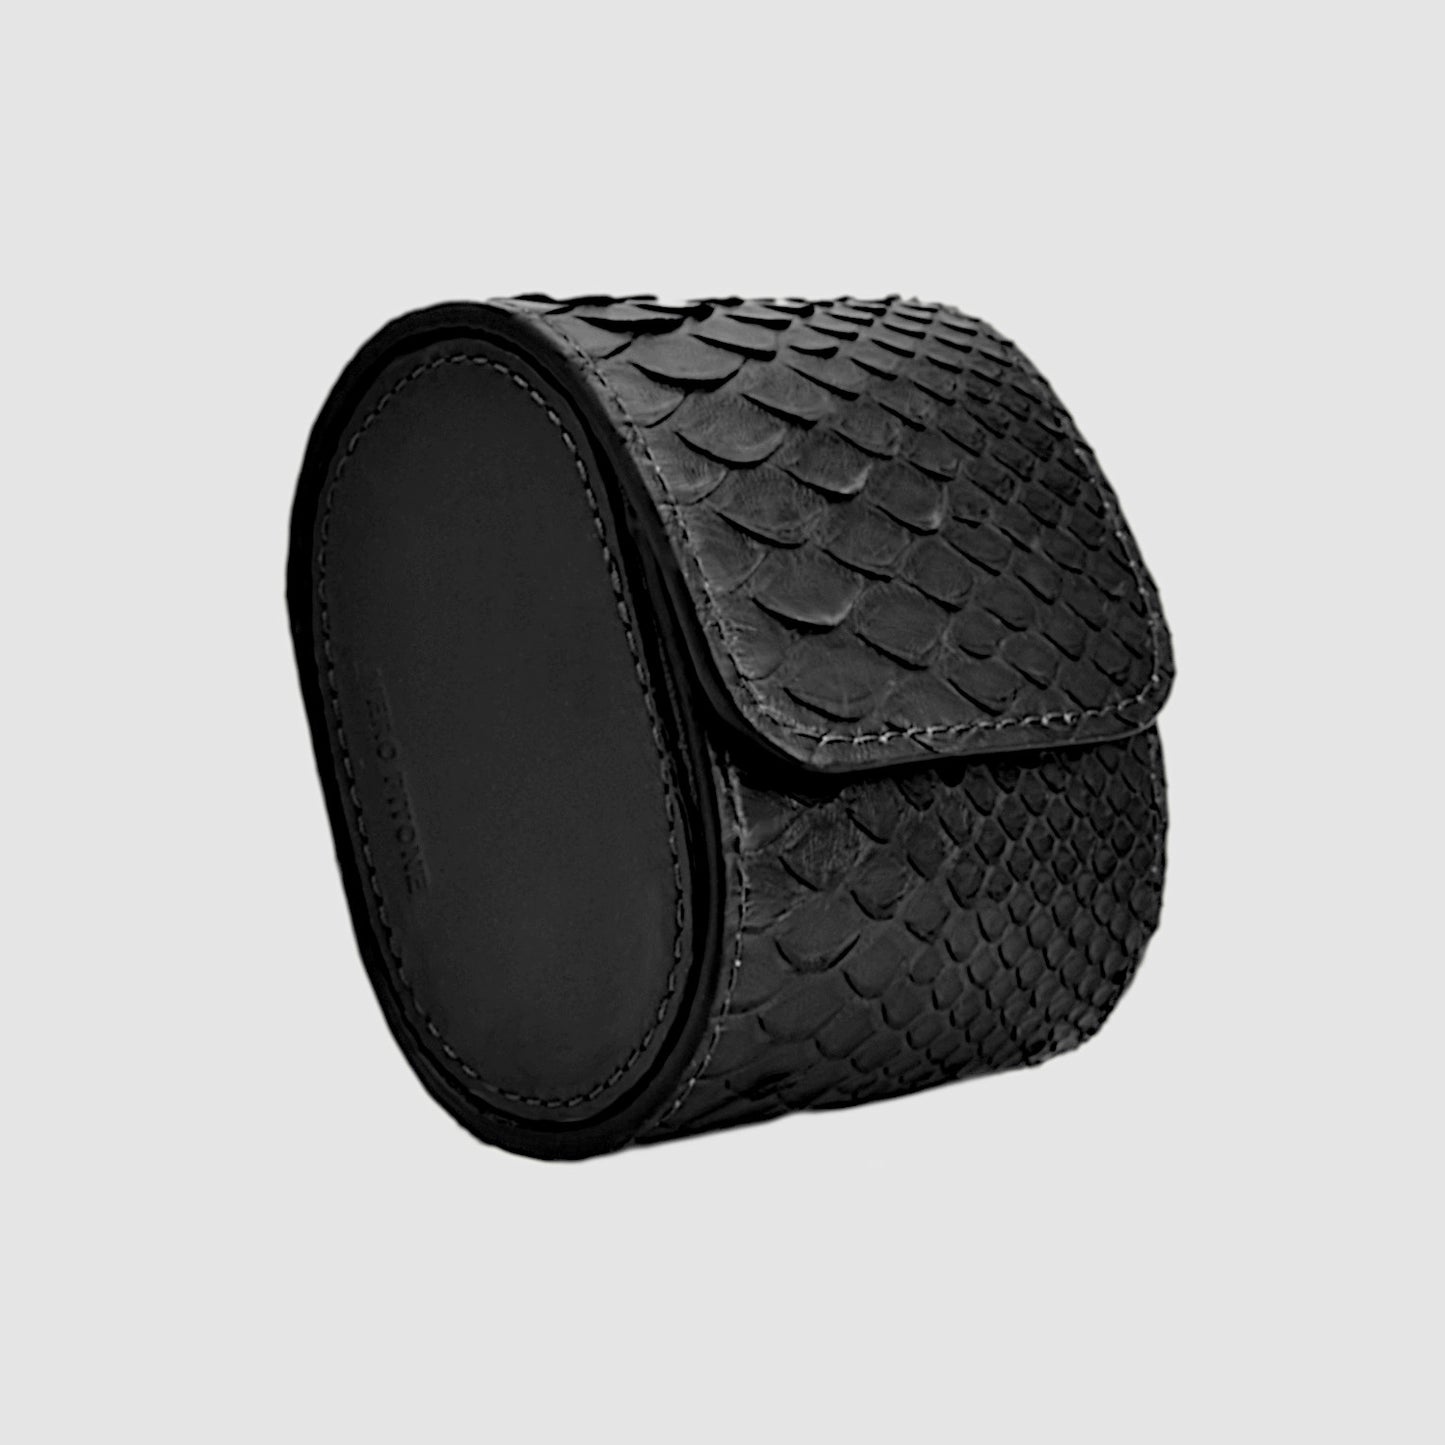 Customizable Watch Roll case in genuine python leather - Black 